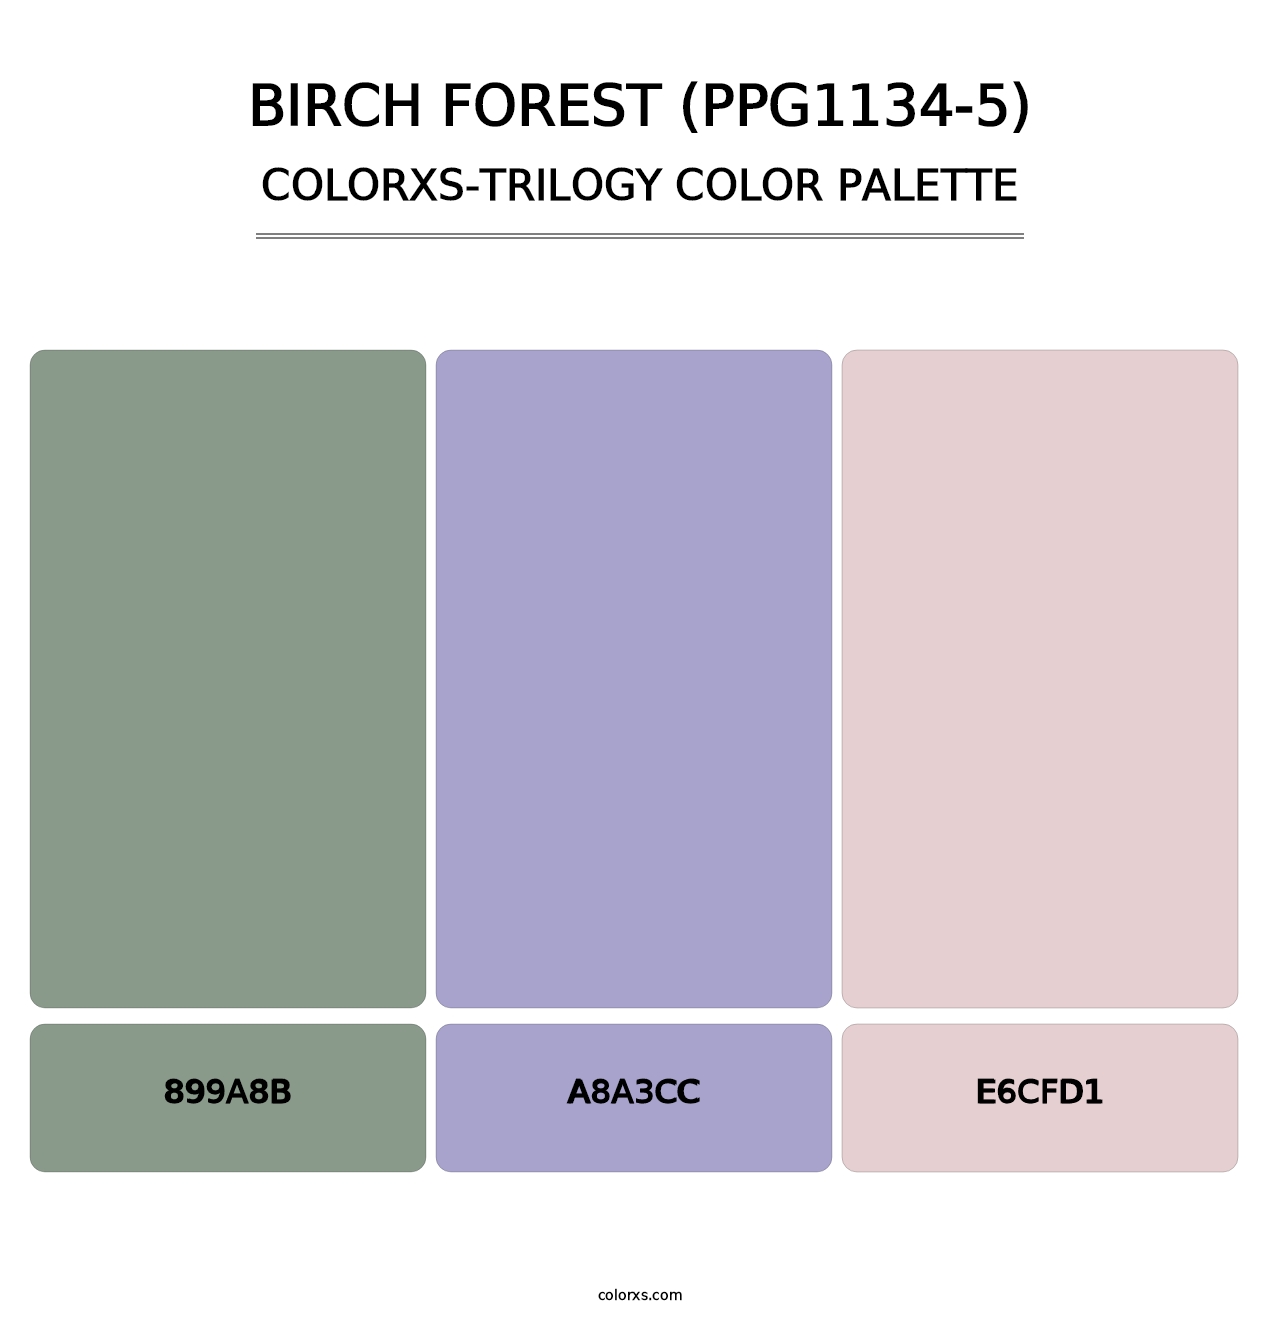 Birch Forest (PPG1134-5) - Colorxs Trilogy Palette